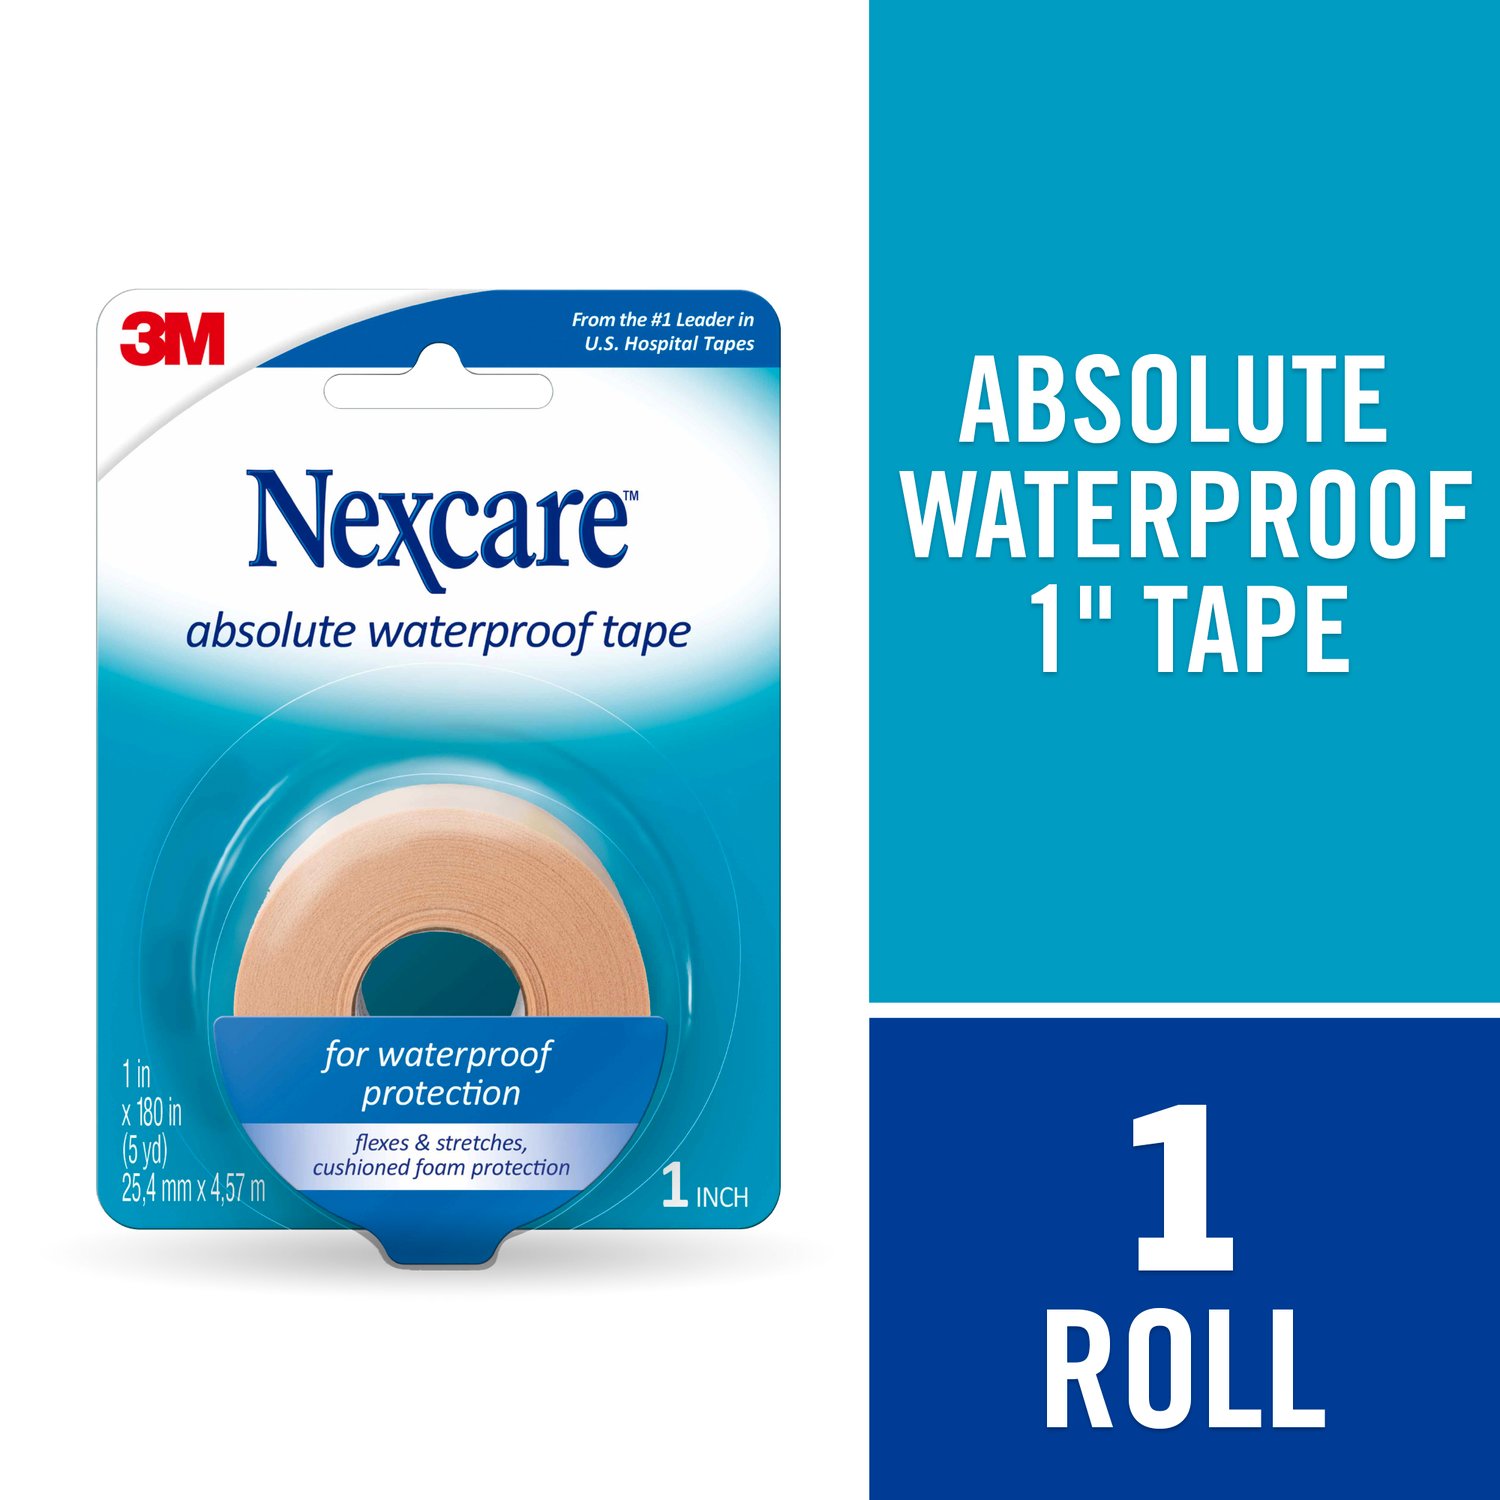 7100169256 - Nexcare Absolute Waterproof First Aid Tape 731, 1 in x 180 in (25.4mm x 4.57m)